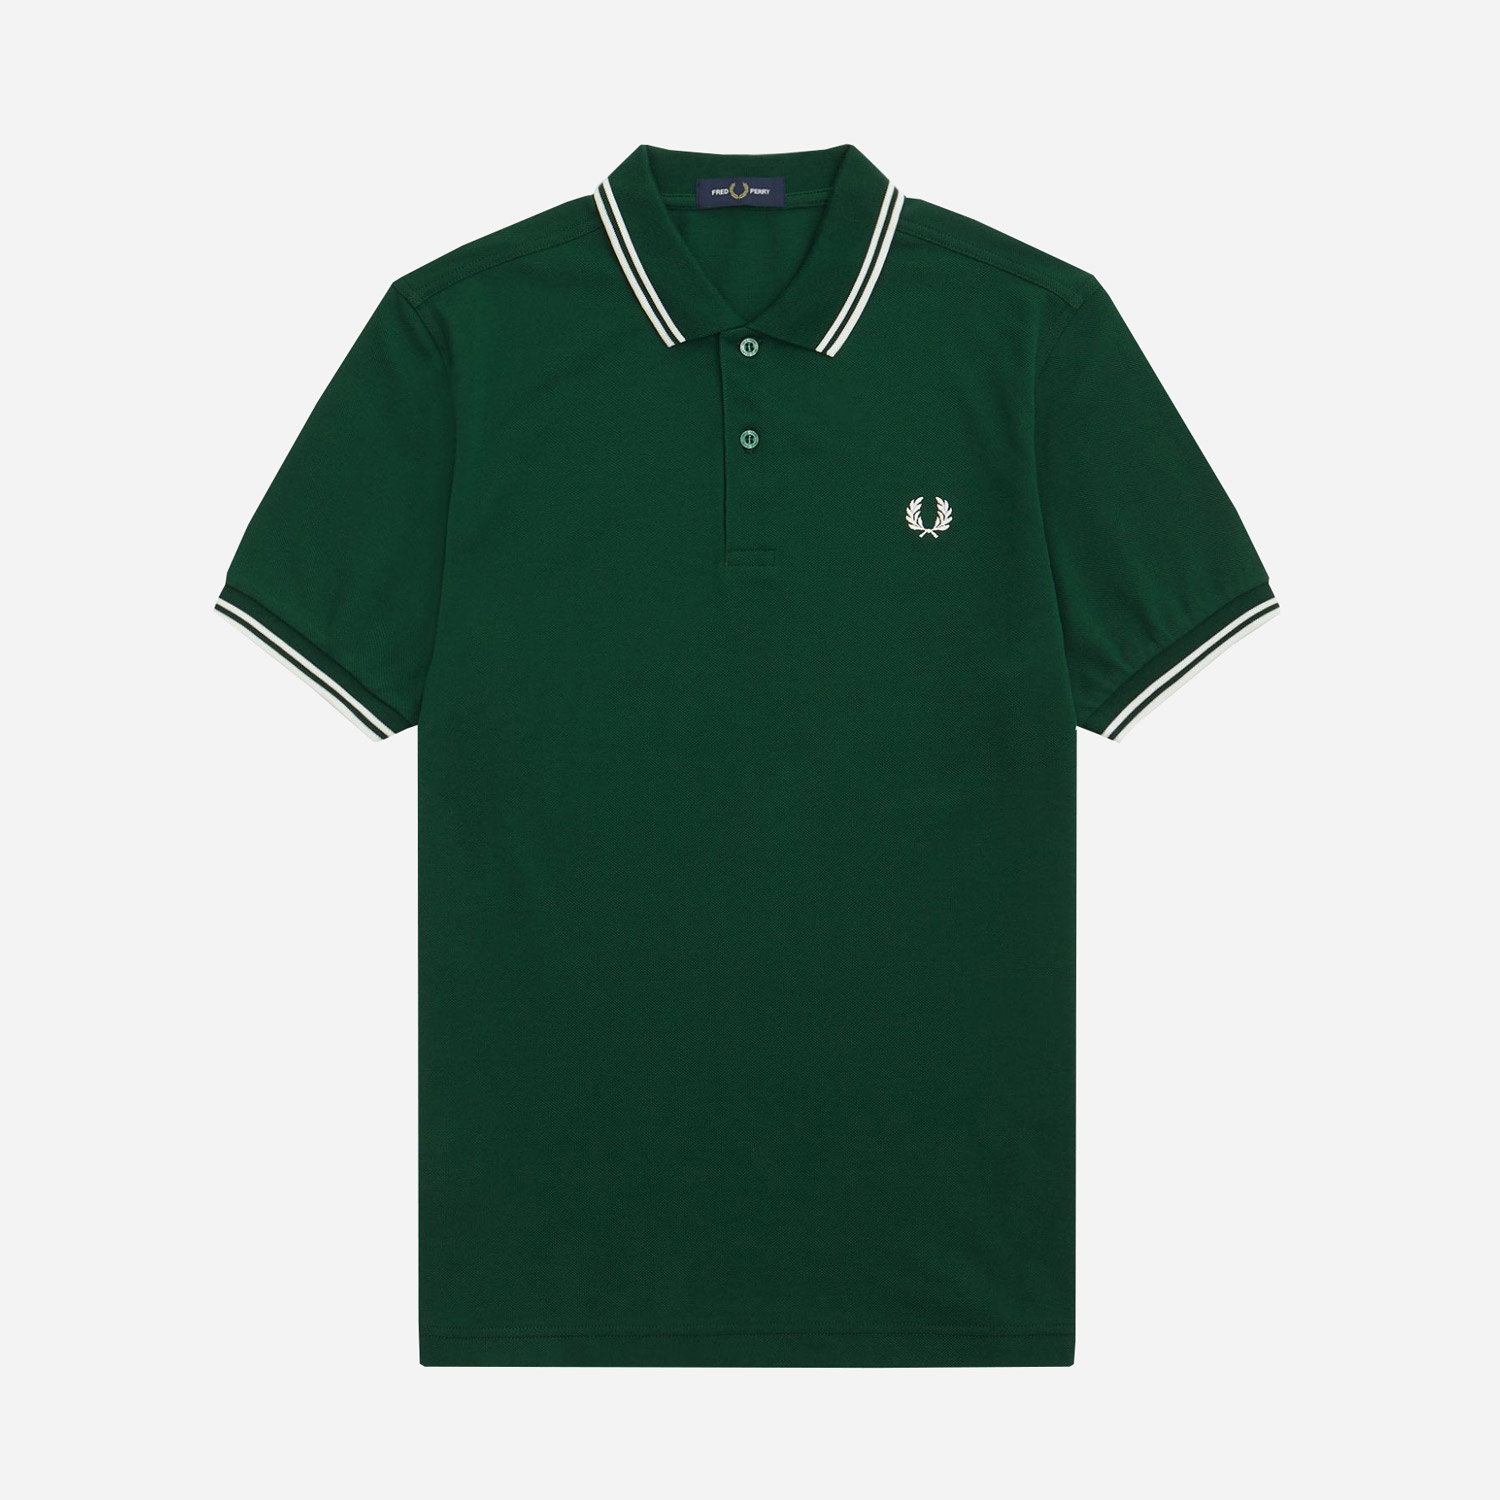 Fred Perry Twin Tipped Polo - Ivy/Snow White/Snow White